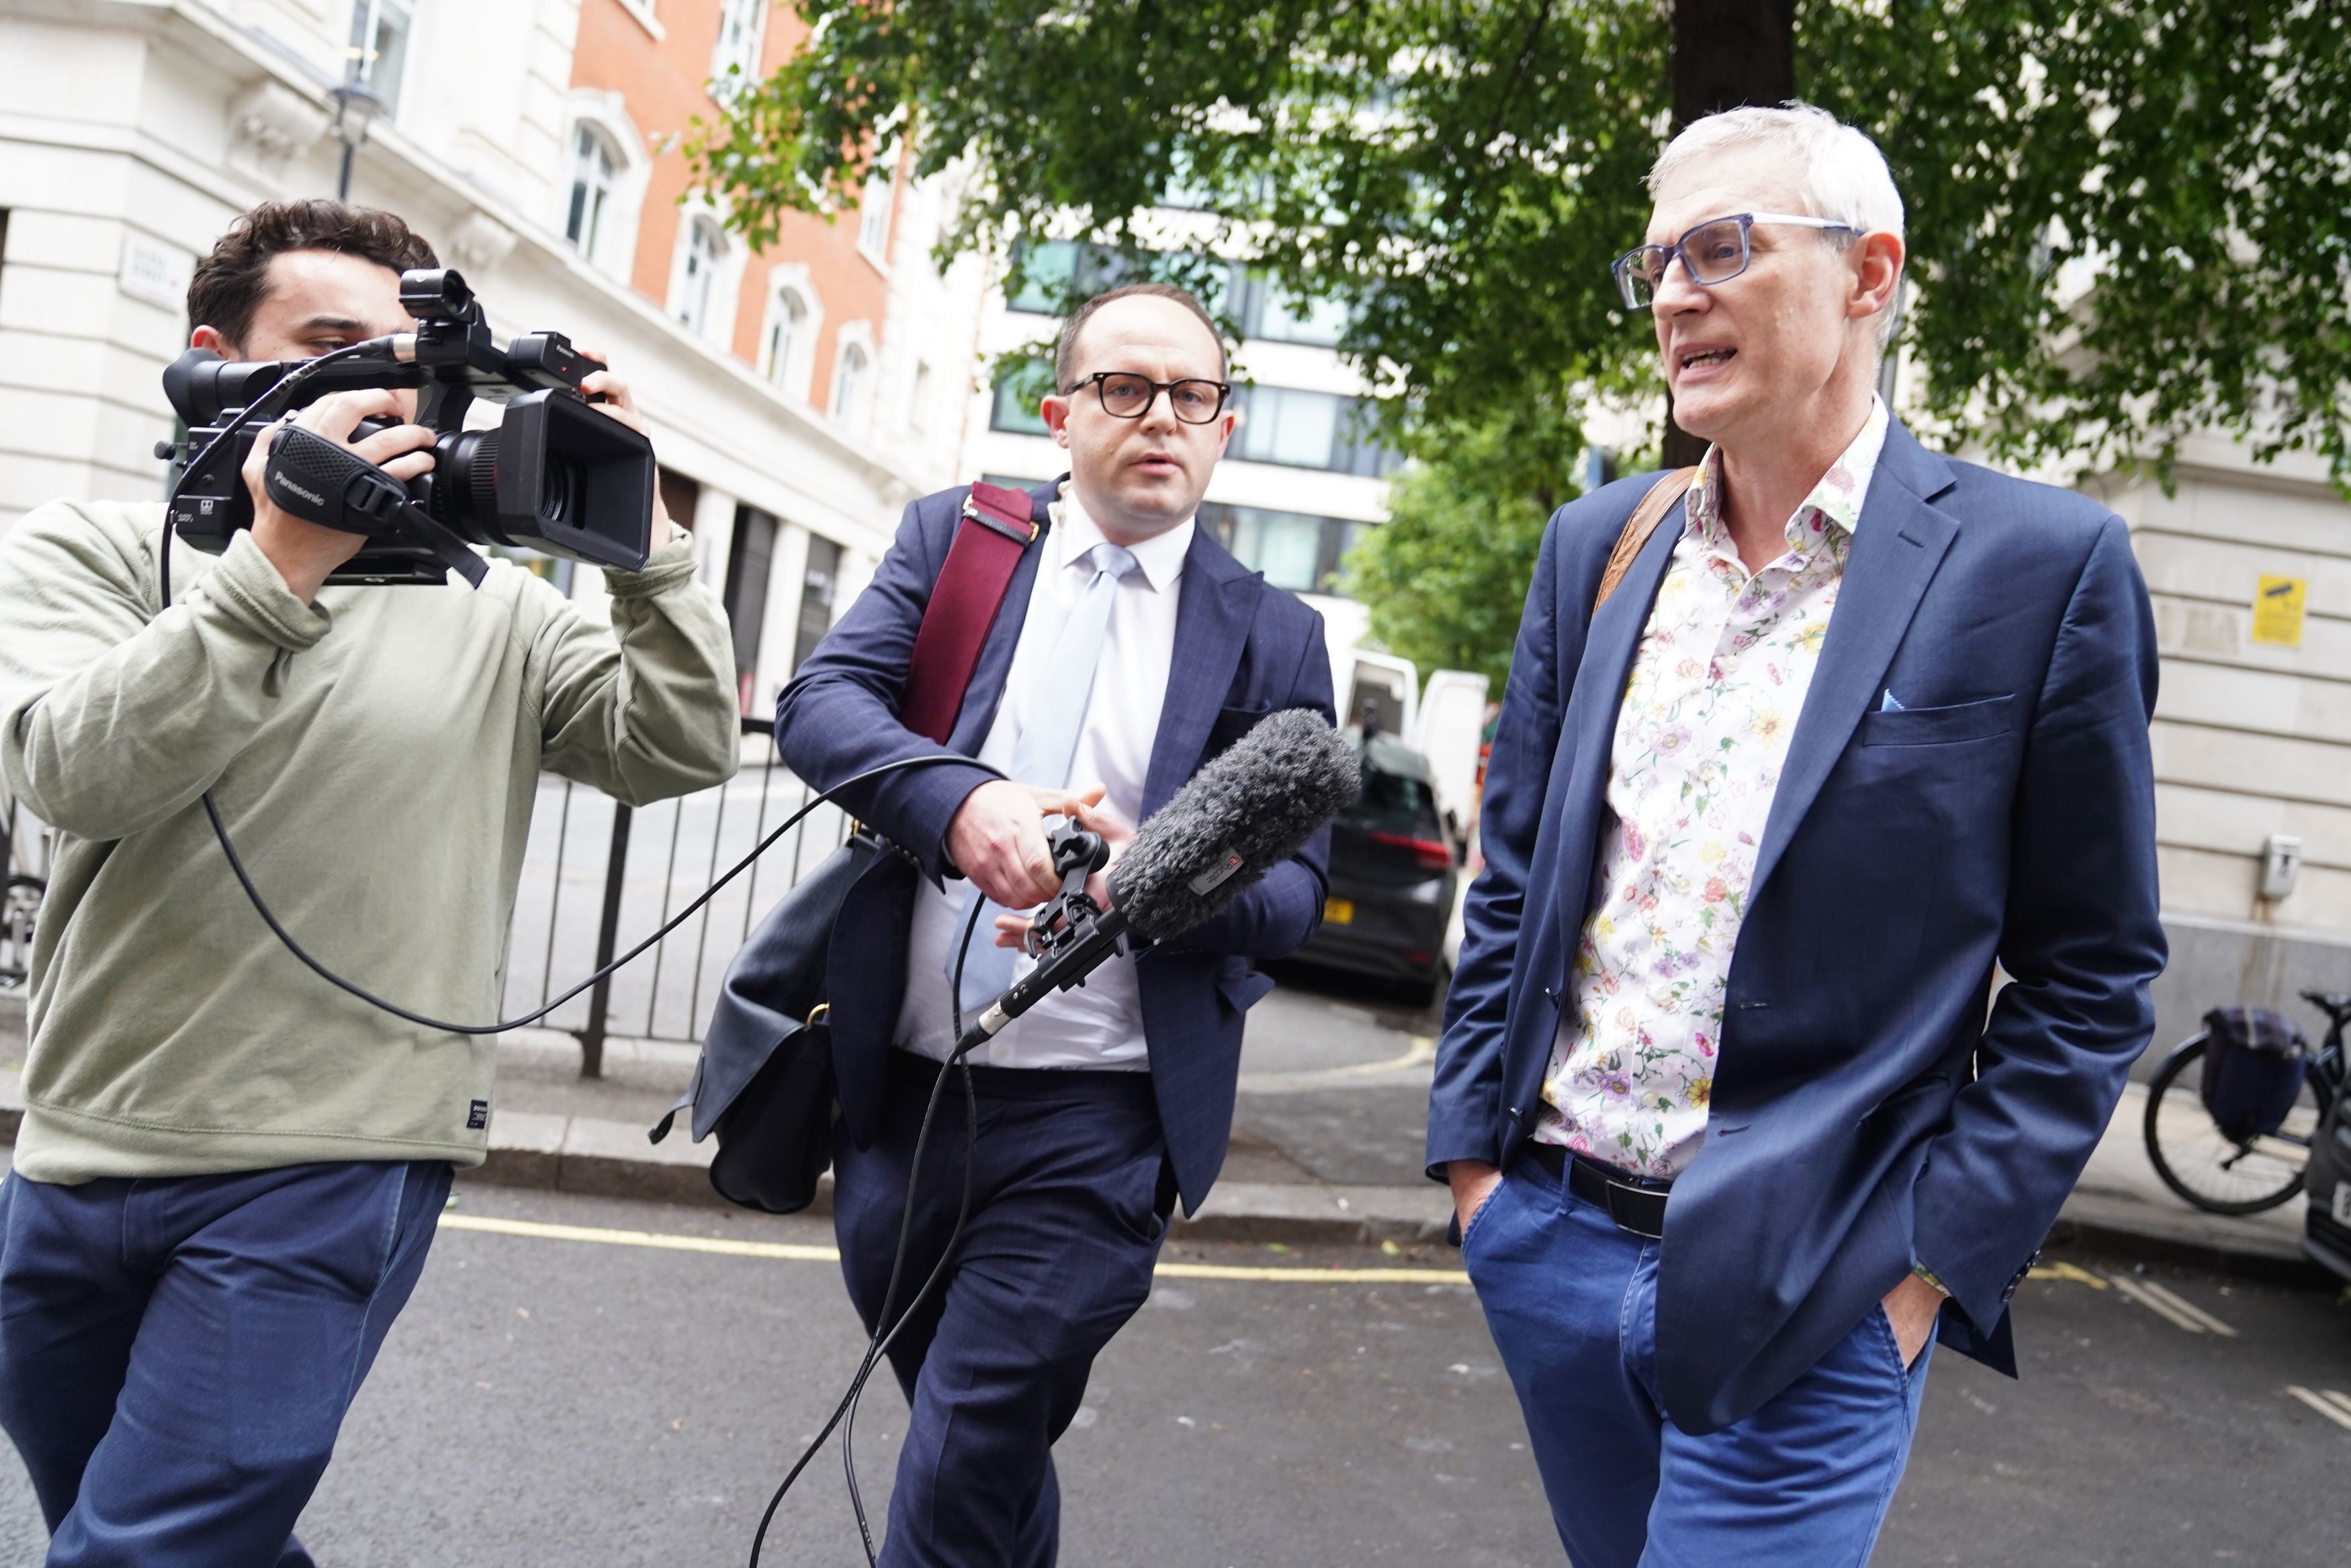 Jeremy Vine speaks to the media as he calls on the presenter to ‘come forward’